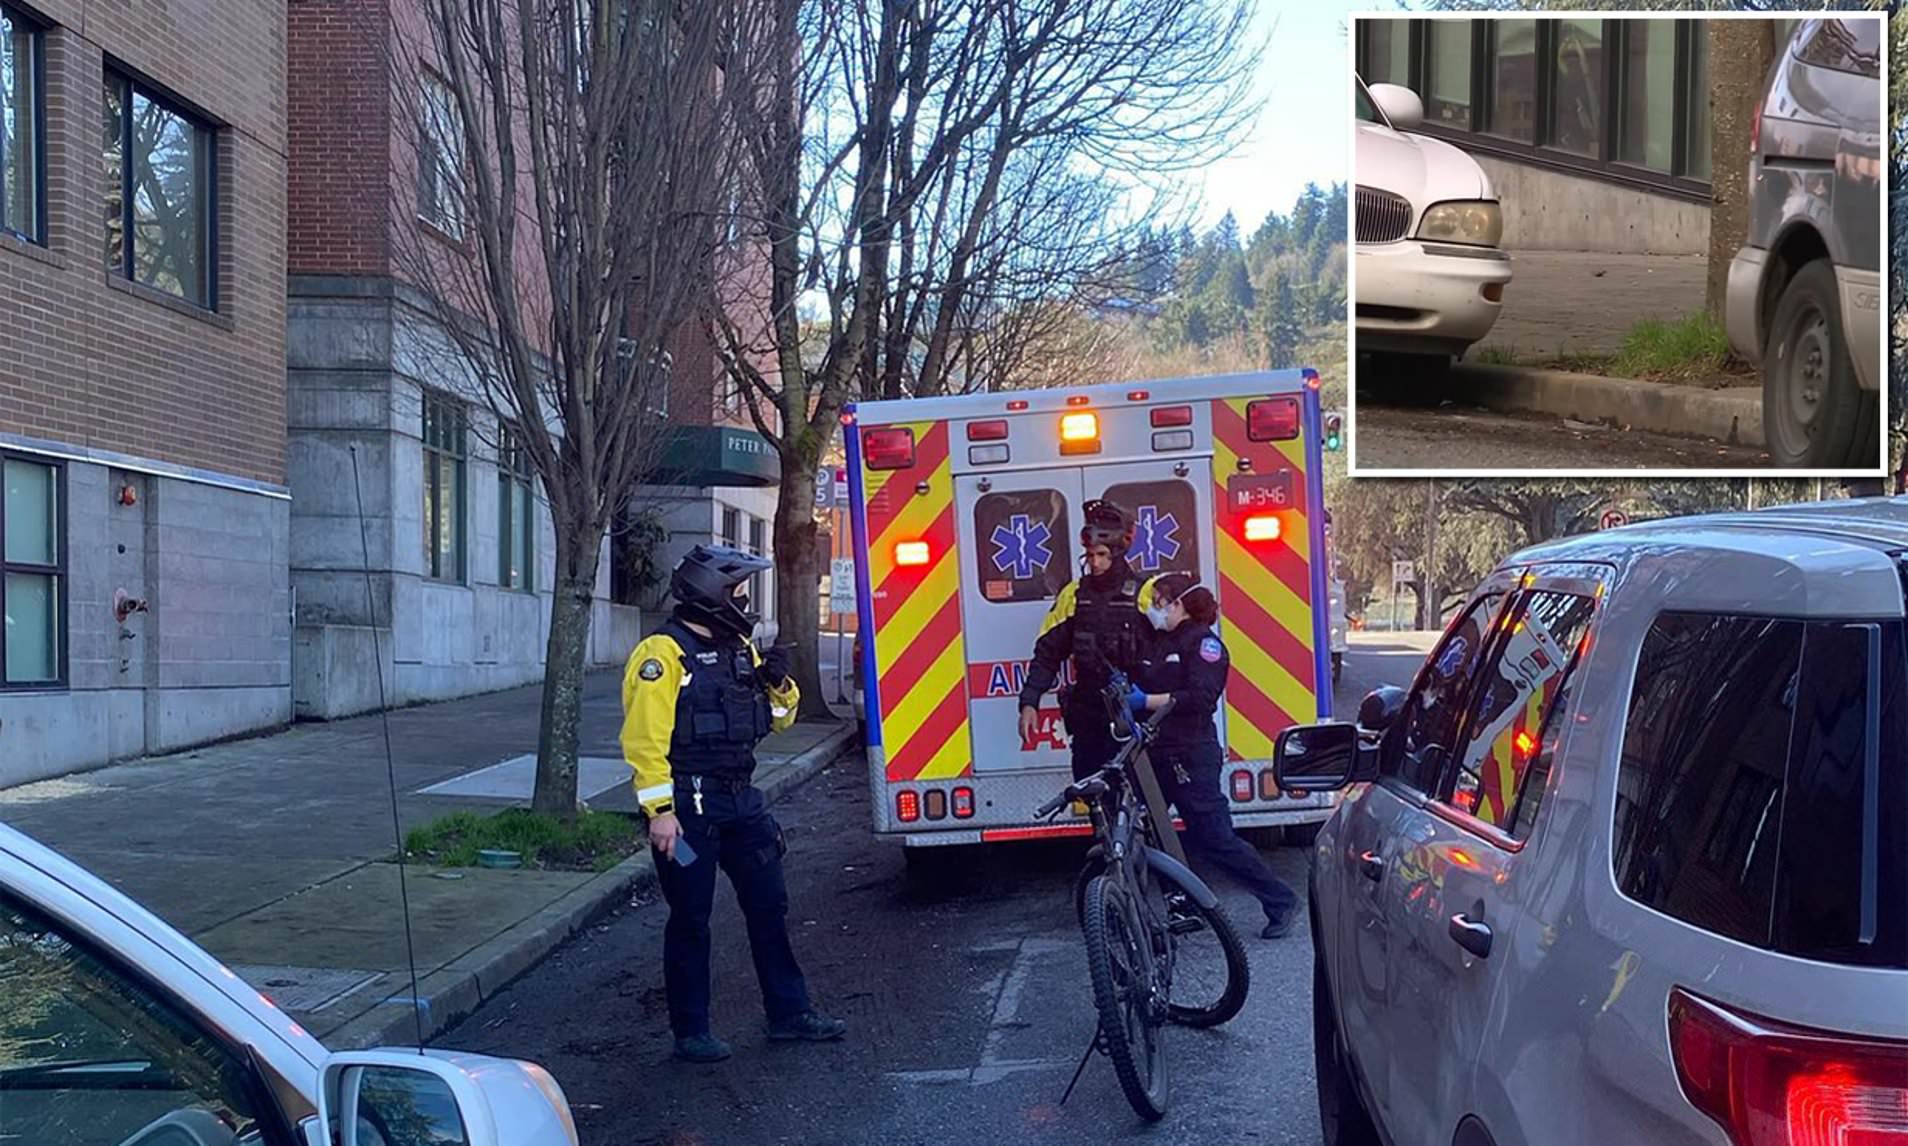 Portland woman suffering a 'mental health crisis' gives birth on SIDEWALK and ABANDONS baby on the ground before stumbling away still covered in blood and amniotic fluid